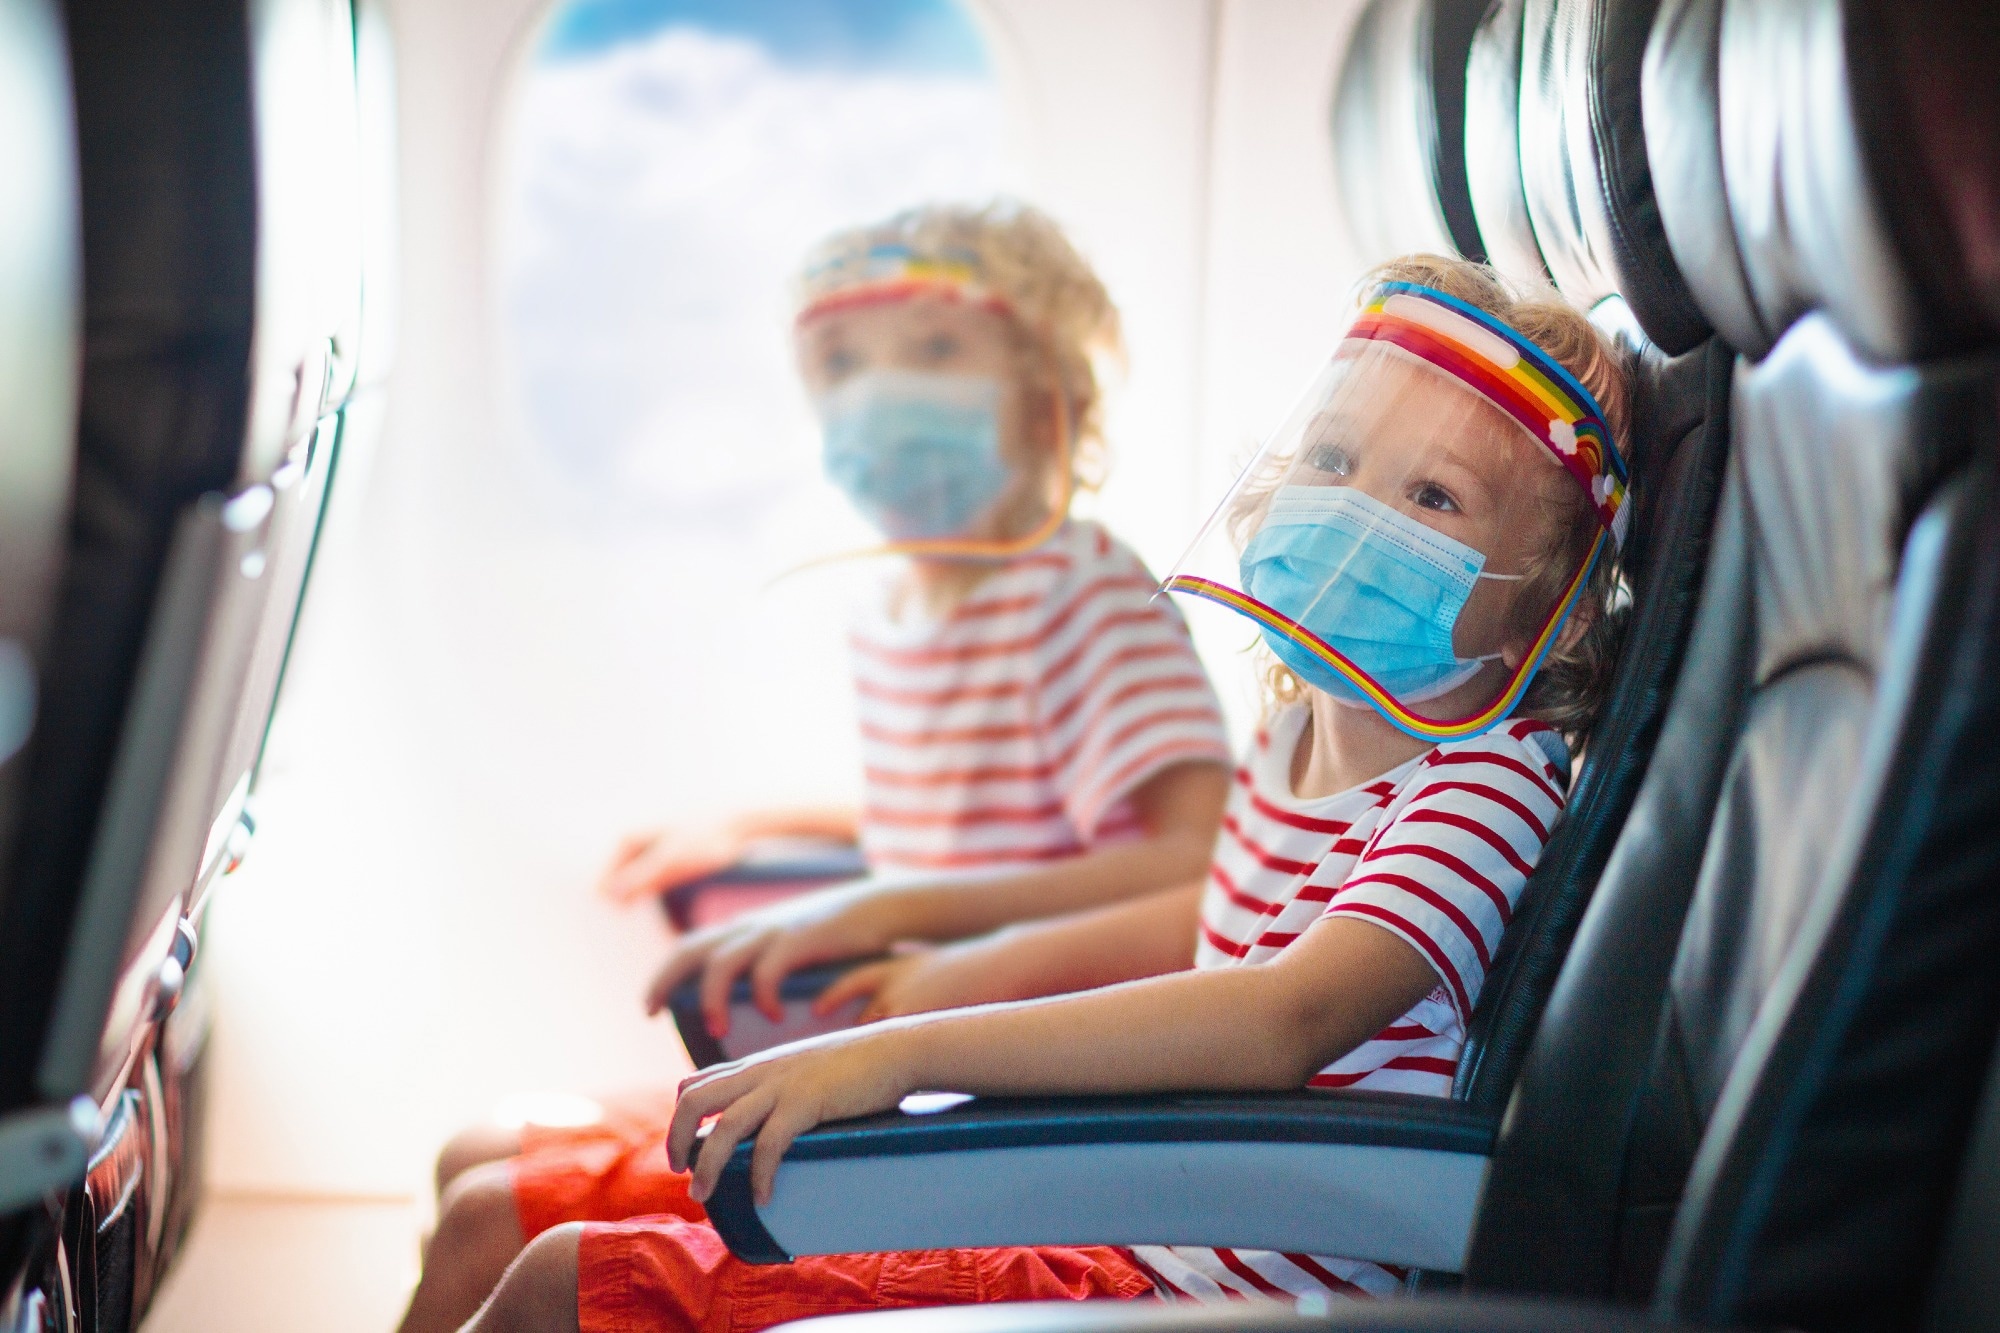 Study: Evaluating vacant middle seats and masks as Coronovirus exposure reduction strategies in aircraft cabins using particle tracer experiments and computational fluid dynamics simulations. Image Credit: FamVeld / Shutterstock